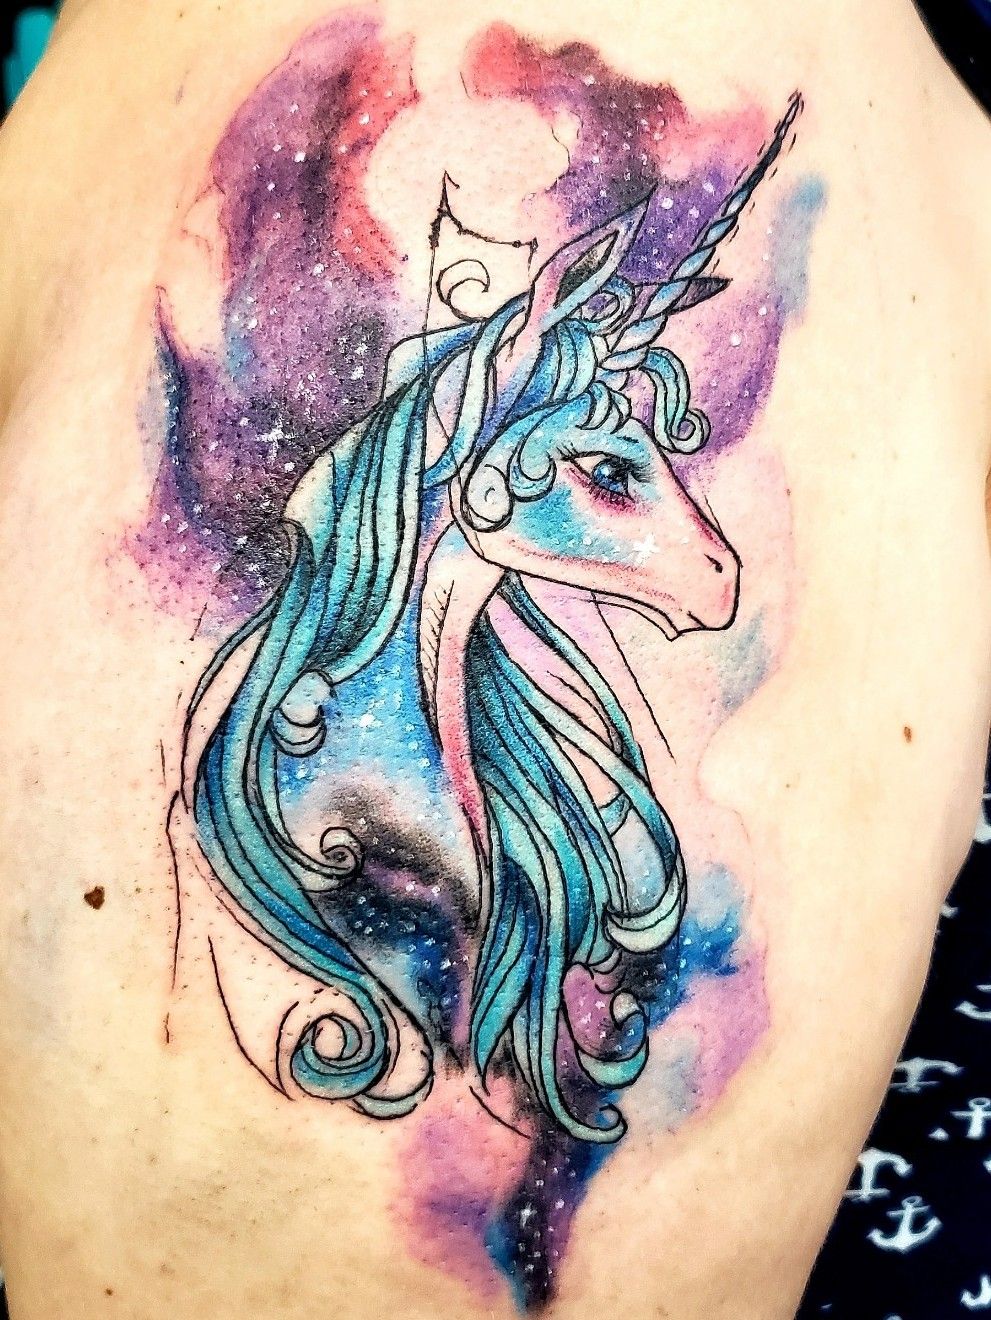 The Last Unicorn calf piece pair done by Mia at Sacred Fire Tattoo in  Bath Maine  rtattoos